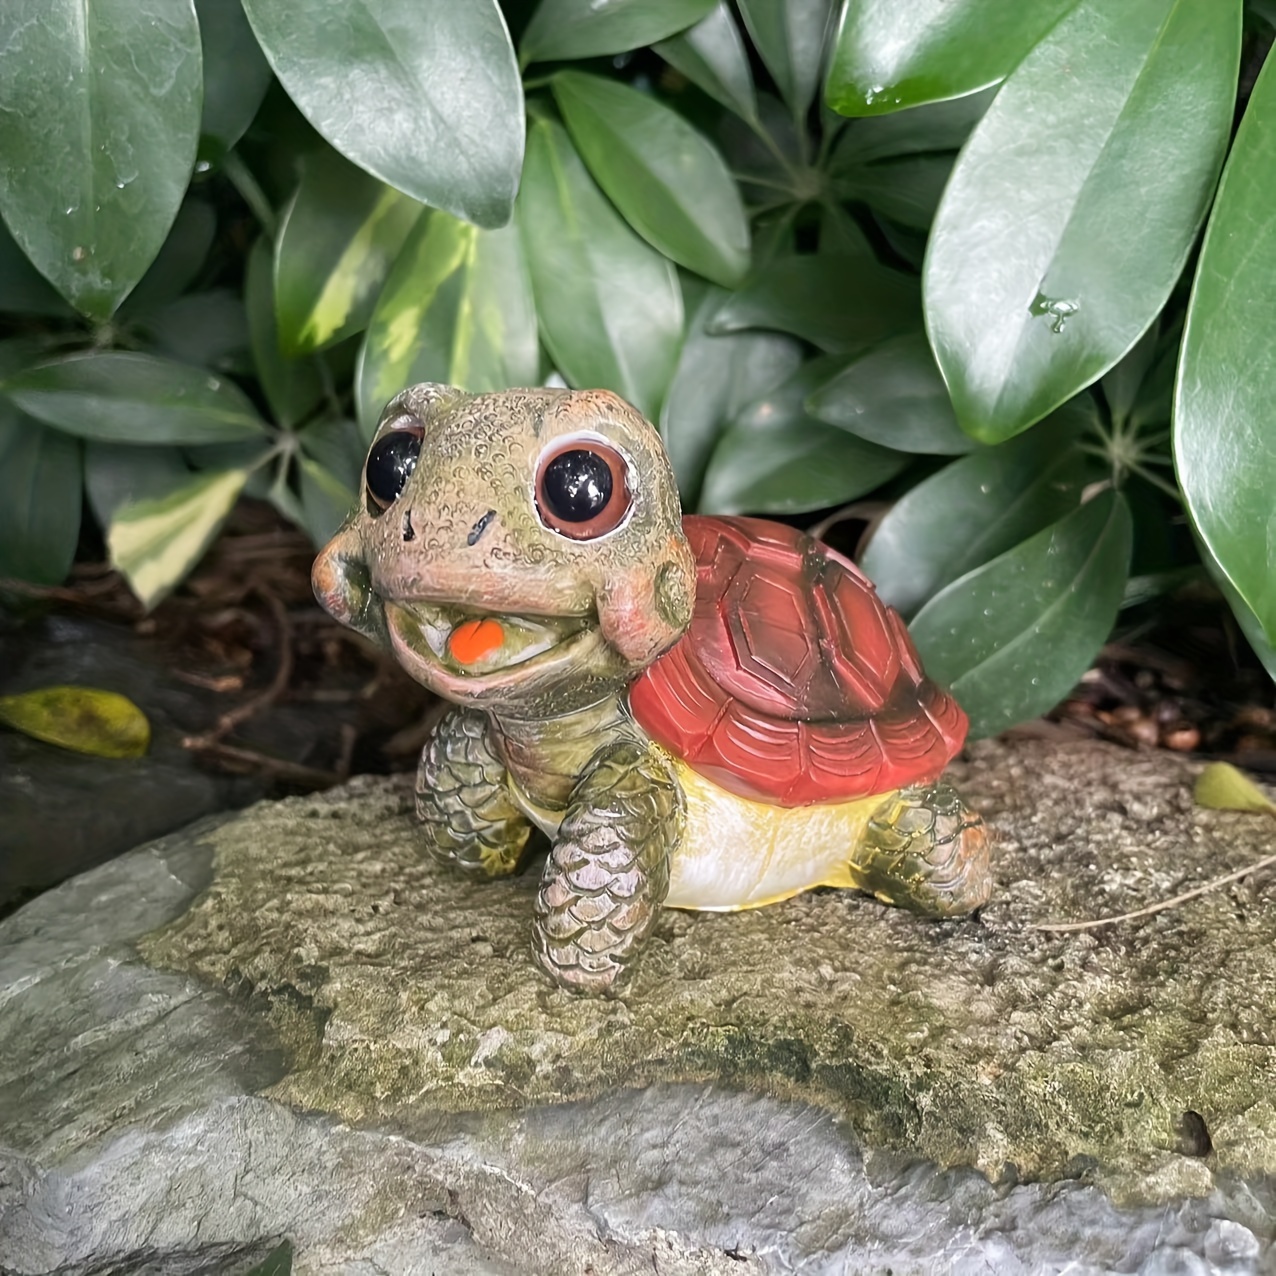 

Cute Cartoon Turtle With Big Eyes - Resin Craft For Garden, Patio, And Home Decor